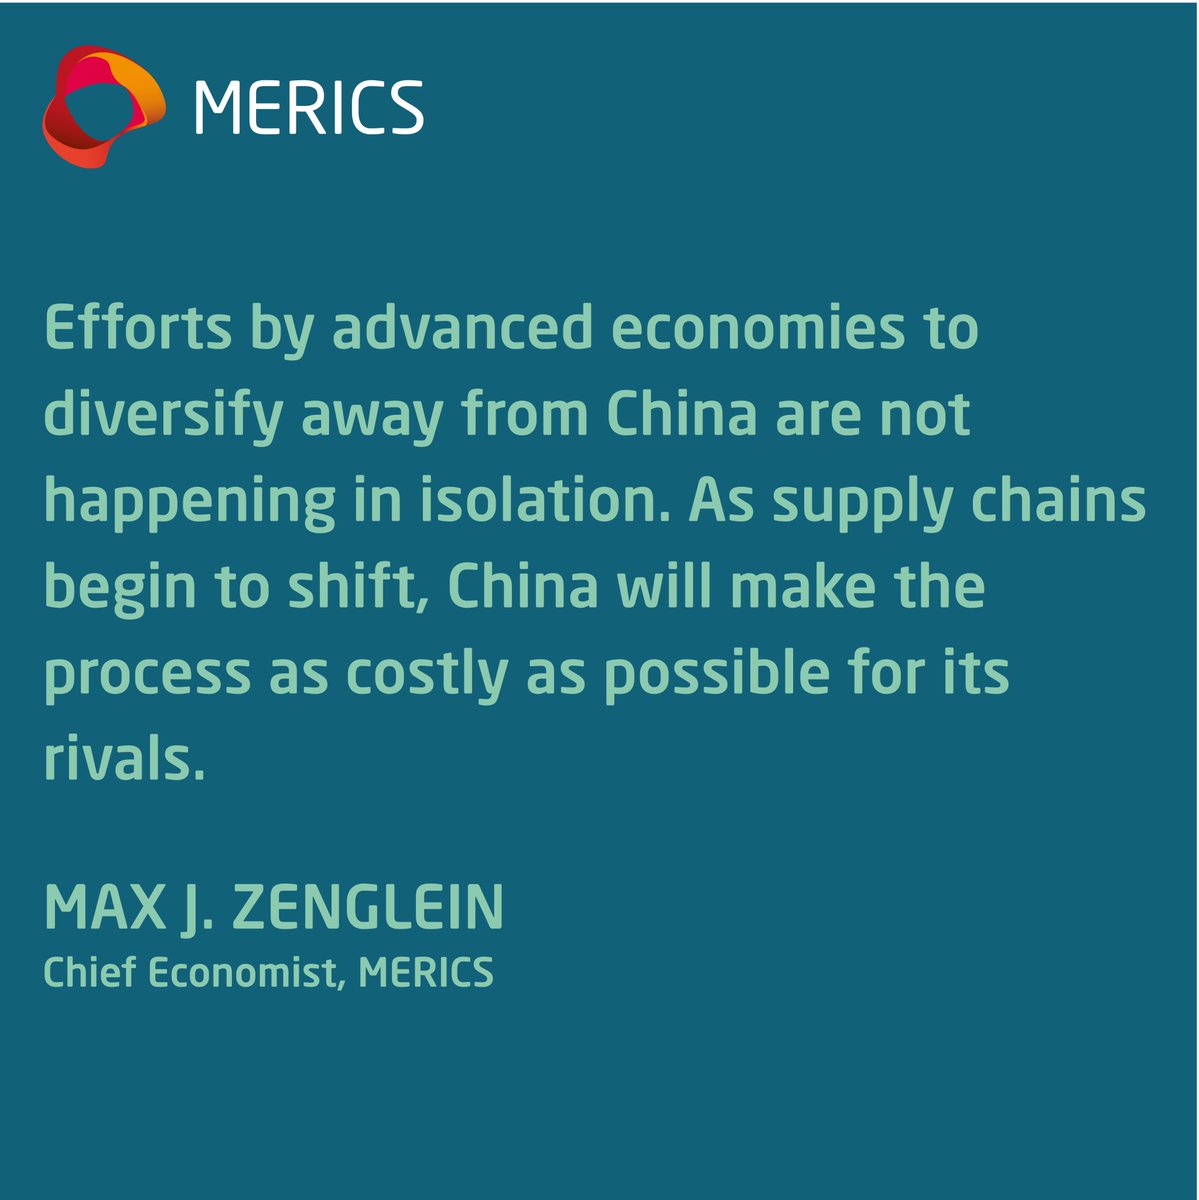 As major economies are trying to reduce their dependency on #China for manufactured goods, Max J. Zenglein looks at how China adapts to these shifts in a new report for the Hinrich Foundation (@hinrichfdn): merics.org/en/report/worl…